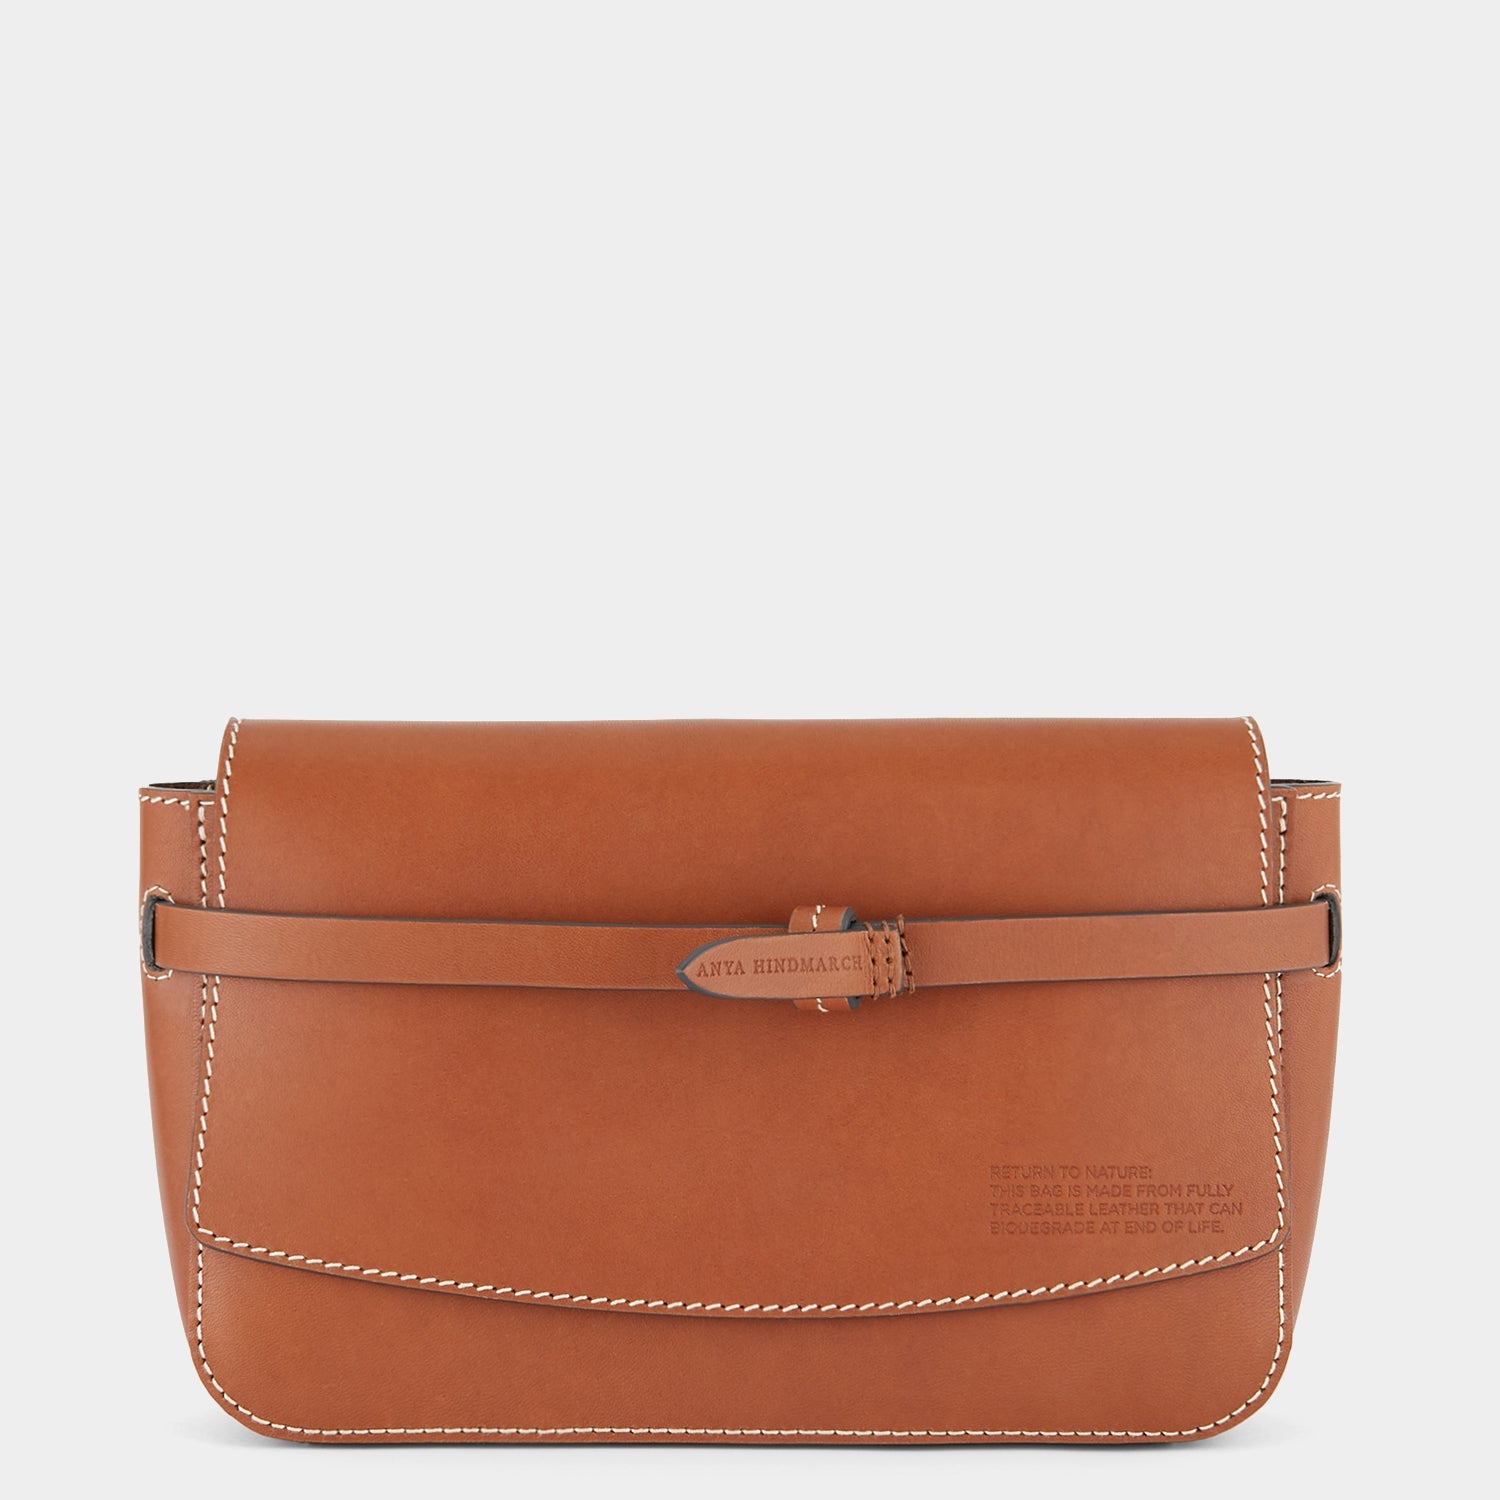 Return to Nature Clutch -

                  
                    Compostable Leather in Tan -
                  

                  Anya Hindmarch US
